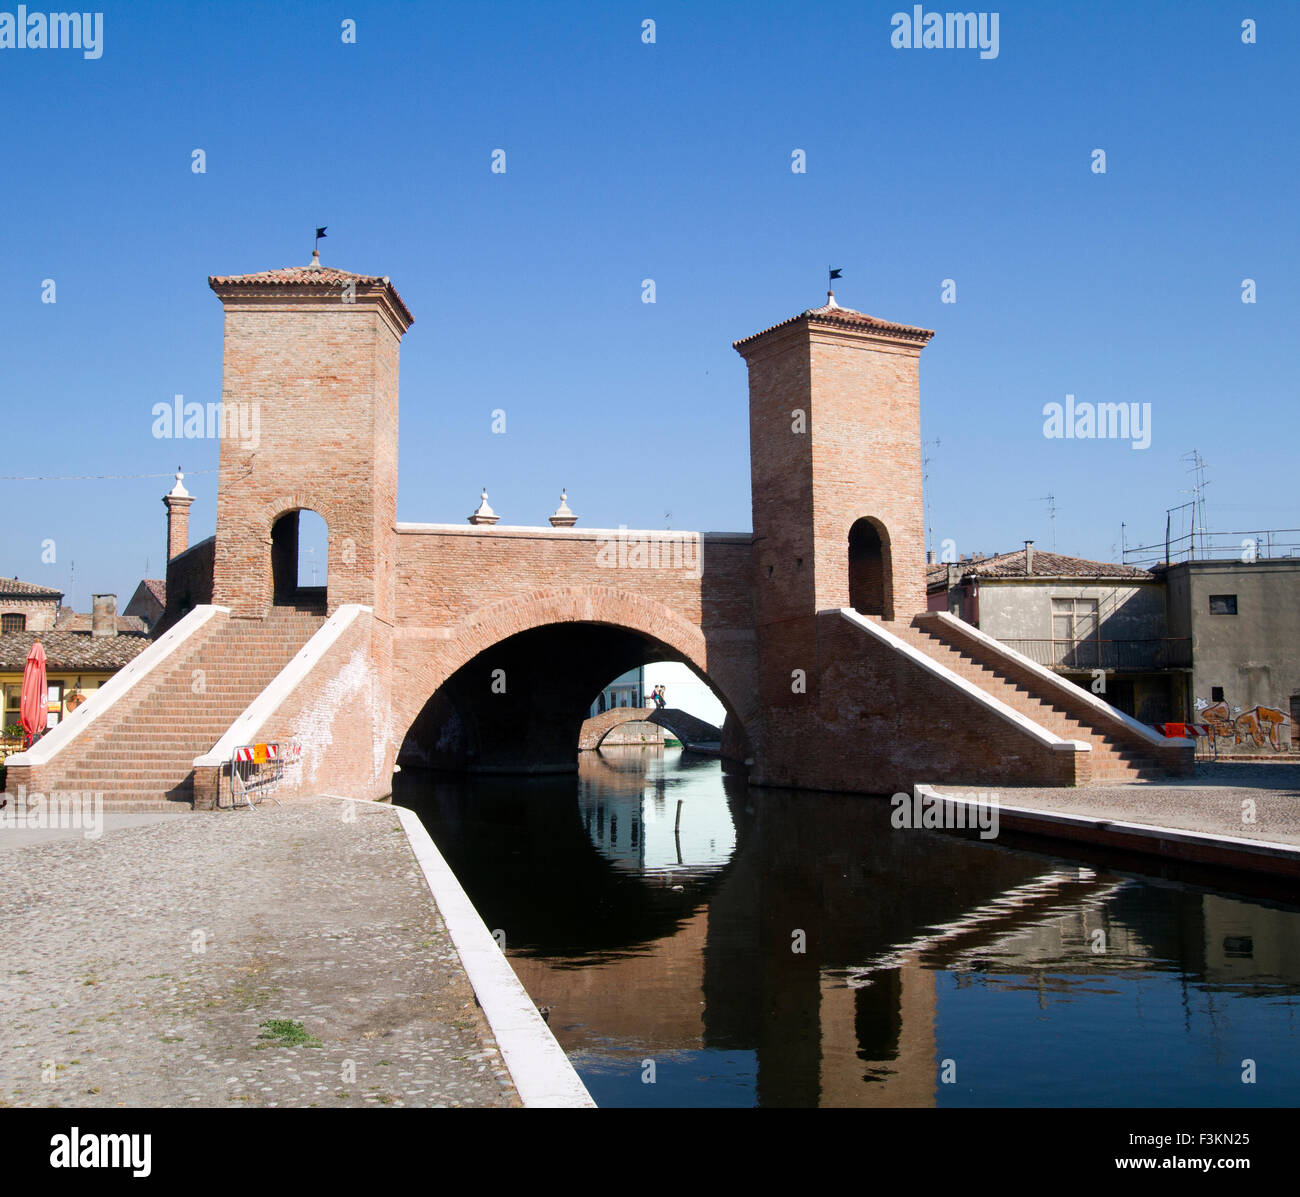 View of Comacchio in italy Stock Photo